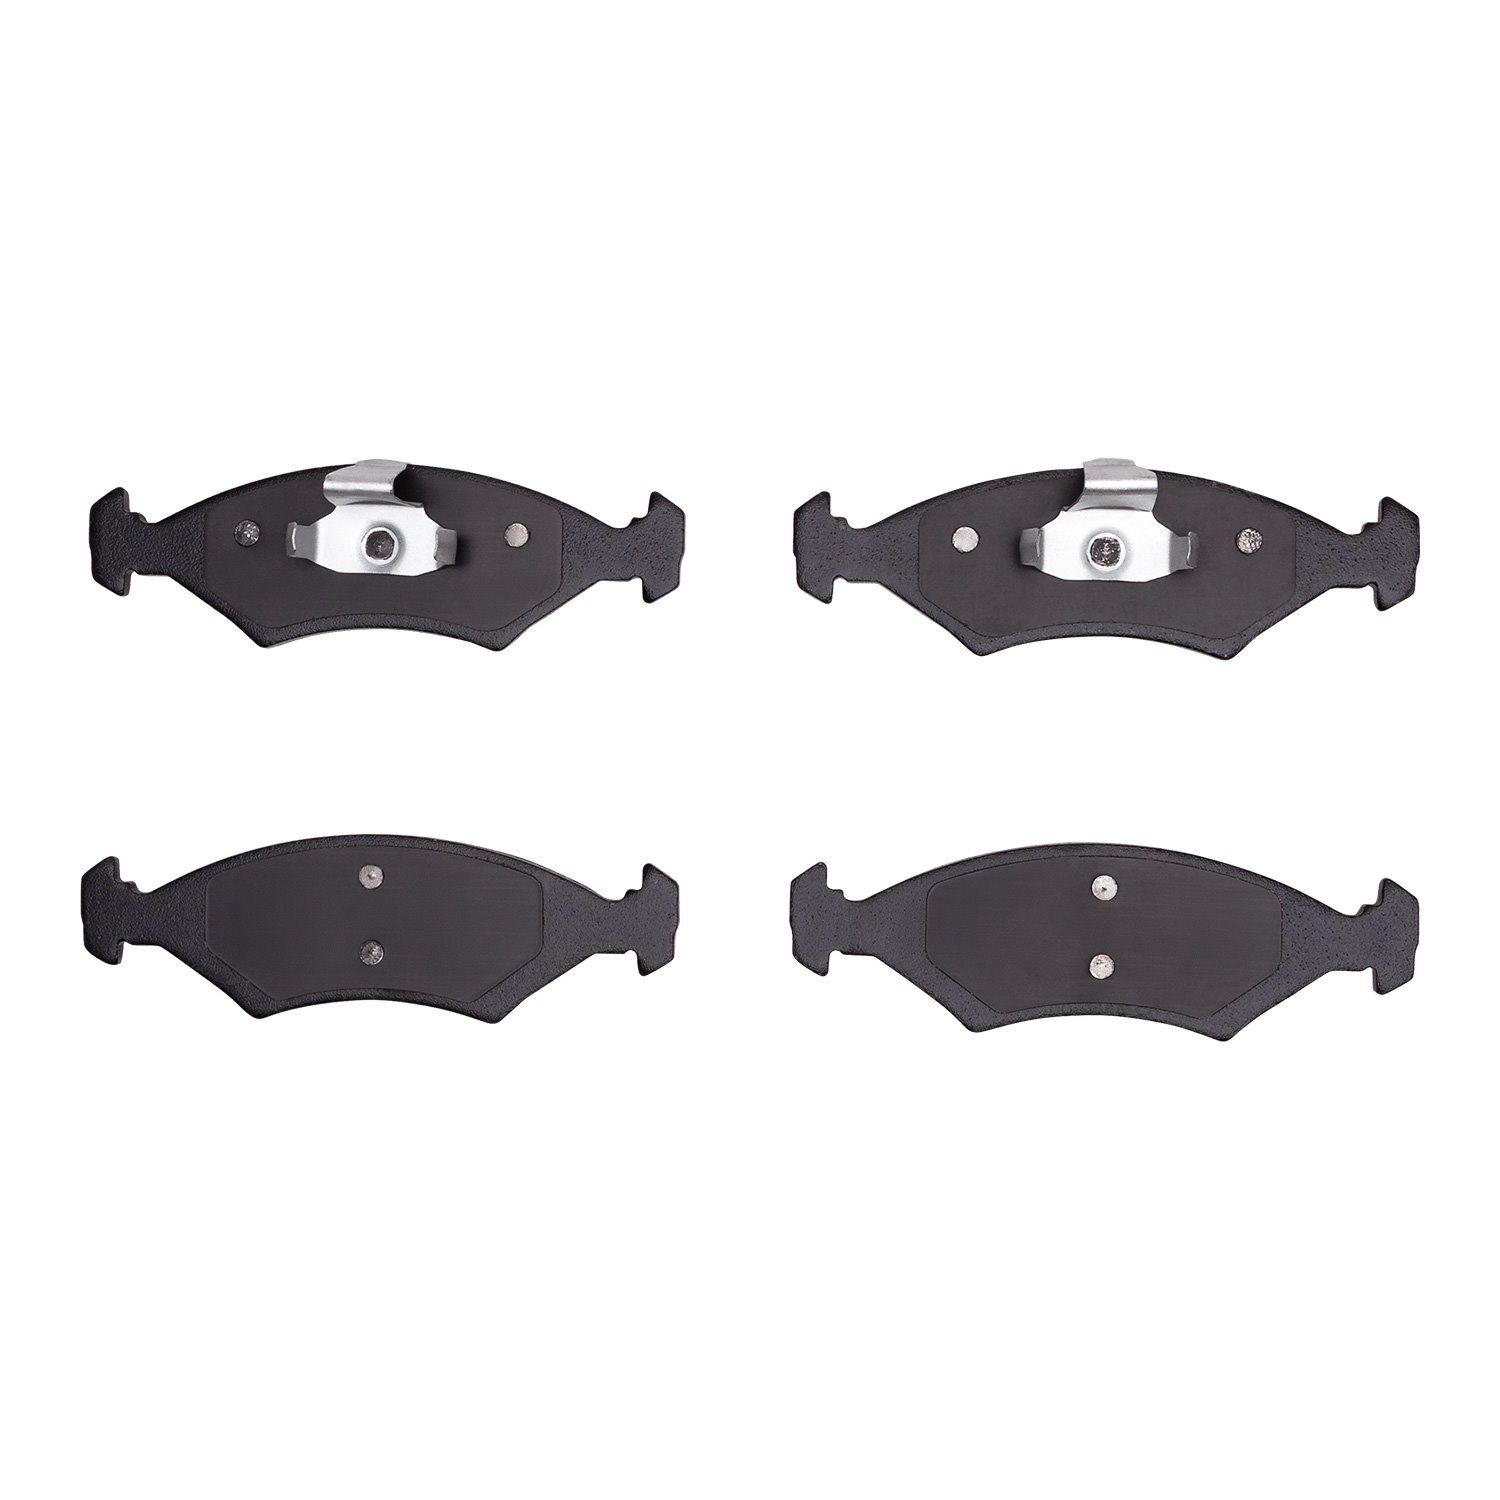 1310-1140-00 3000-Series Ceramic Brake Pads, 1996-2012 Ford/Lincoln/Mercury/Mazda, Position: Front